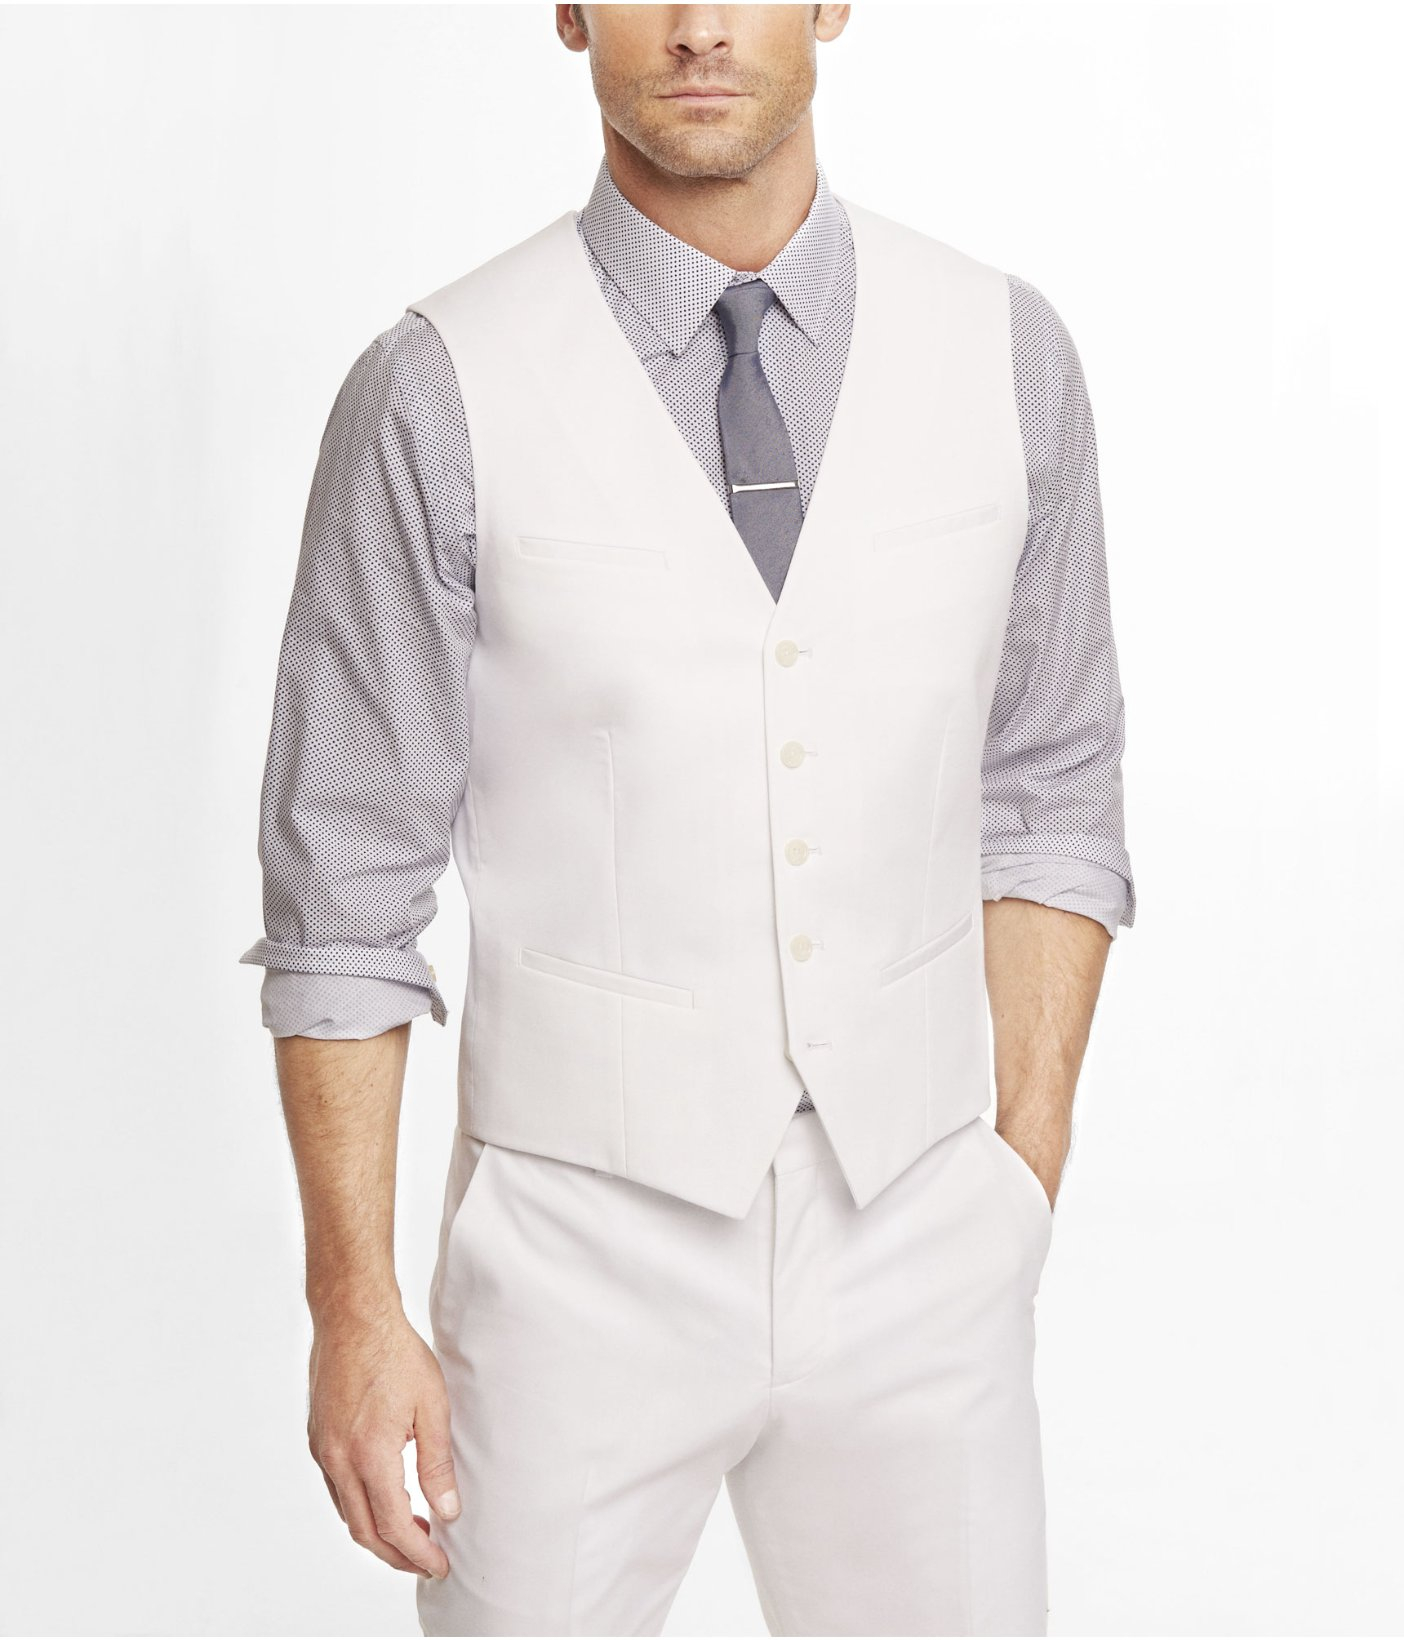 Lyst - Express White Cotton Sateen Suit Vest in White for Men